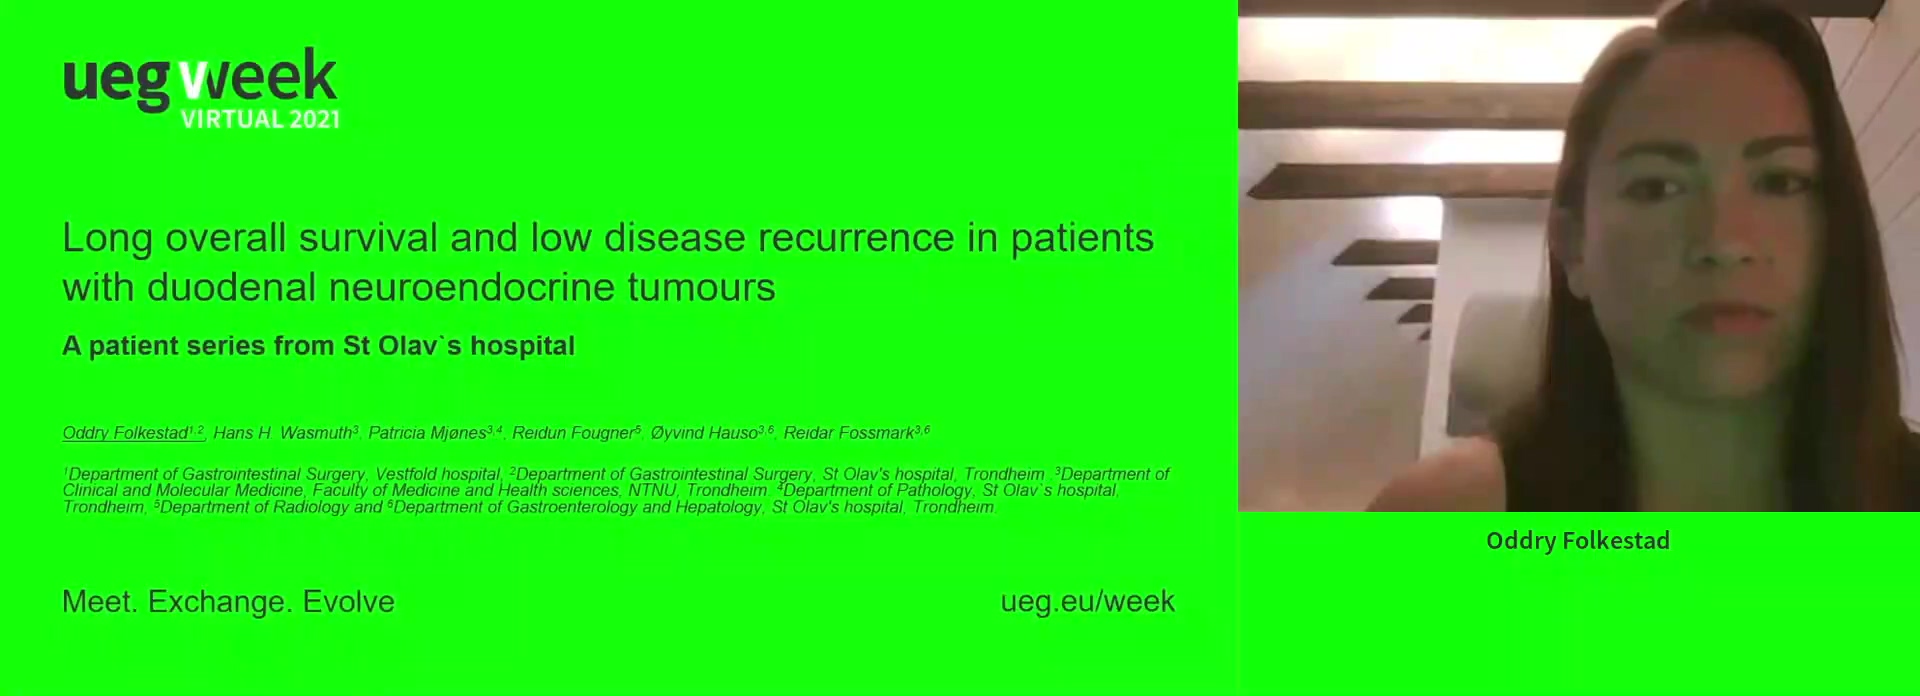 LONG OVERALL SURVIVAL AND LOW DISEASE RECURRENCE IN PATIENTS WITH DUODENAL NEUROENDOCRINE TUMOURS